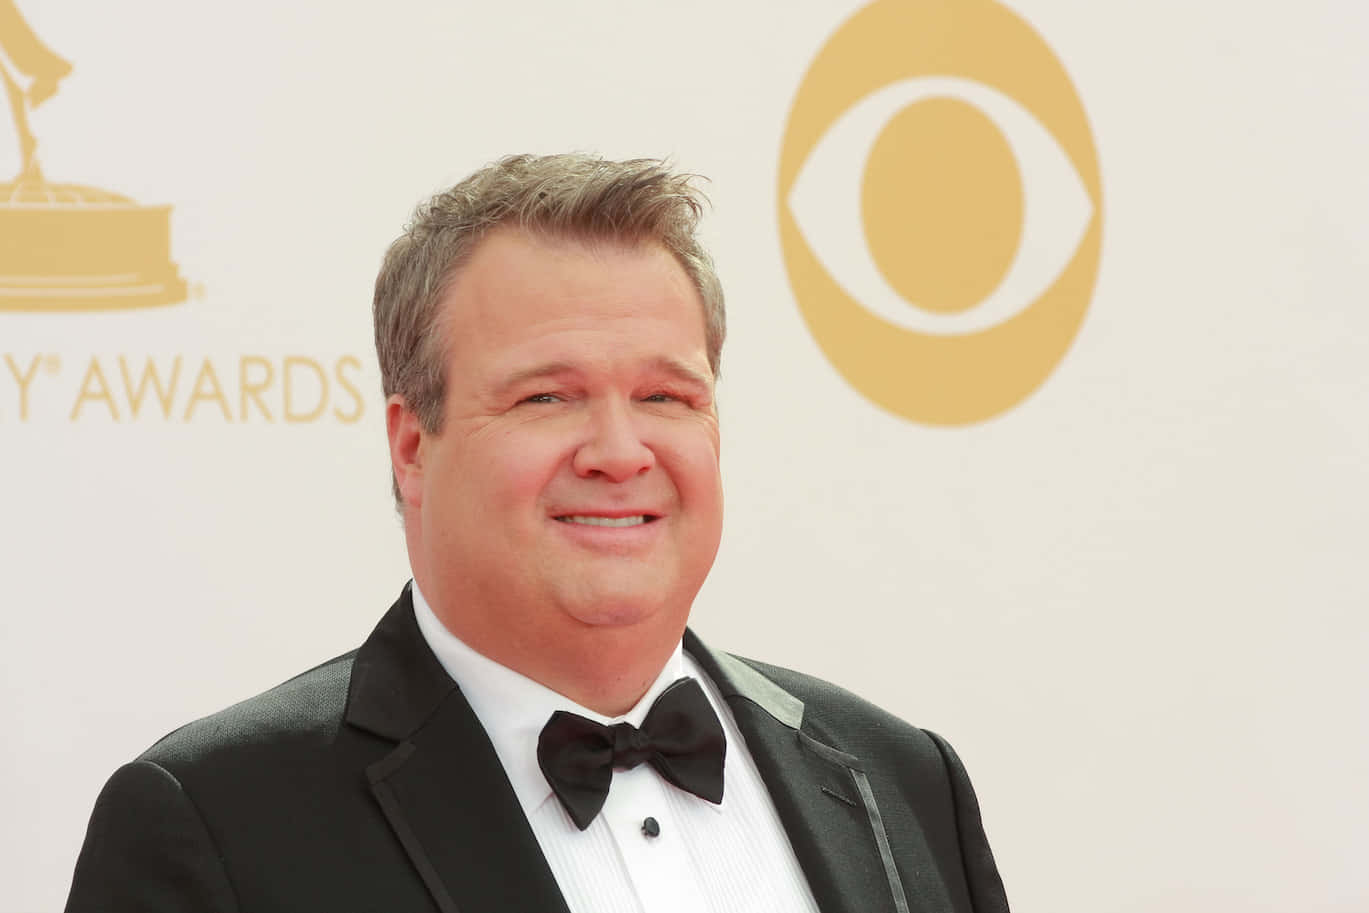 Ericstonestreet Is An American Actor Who Is Best Known For His Role As Cameron Tucker In The Tv Show 